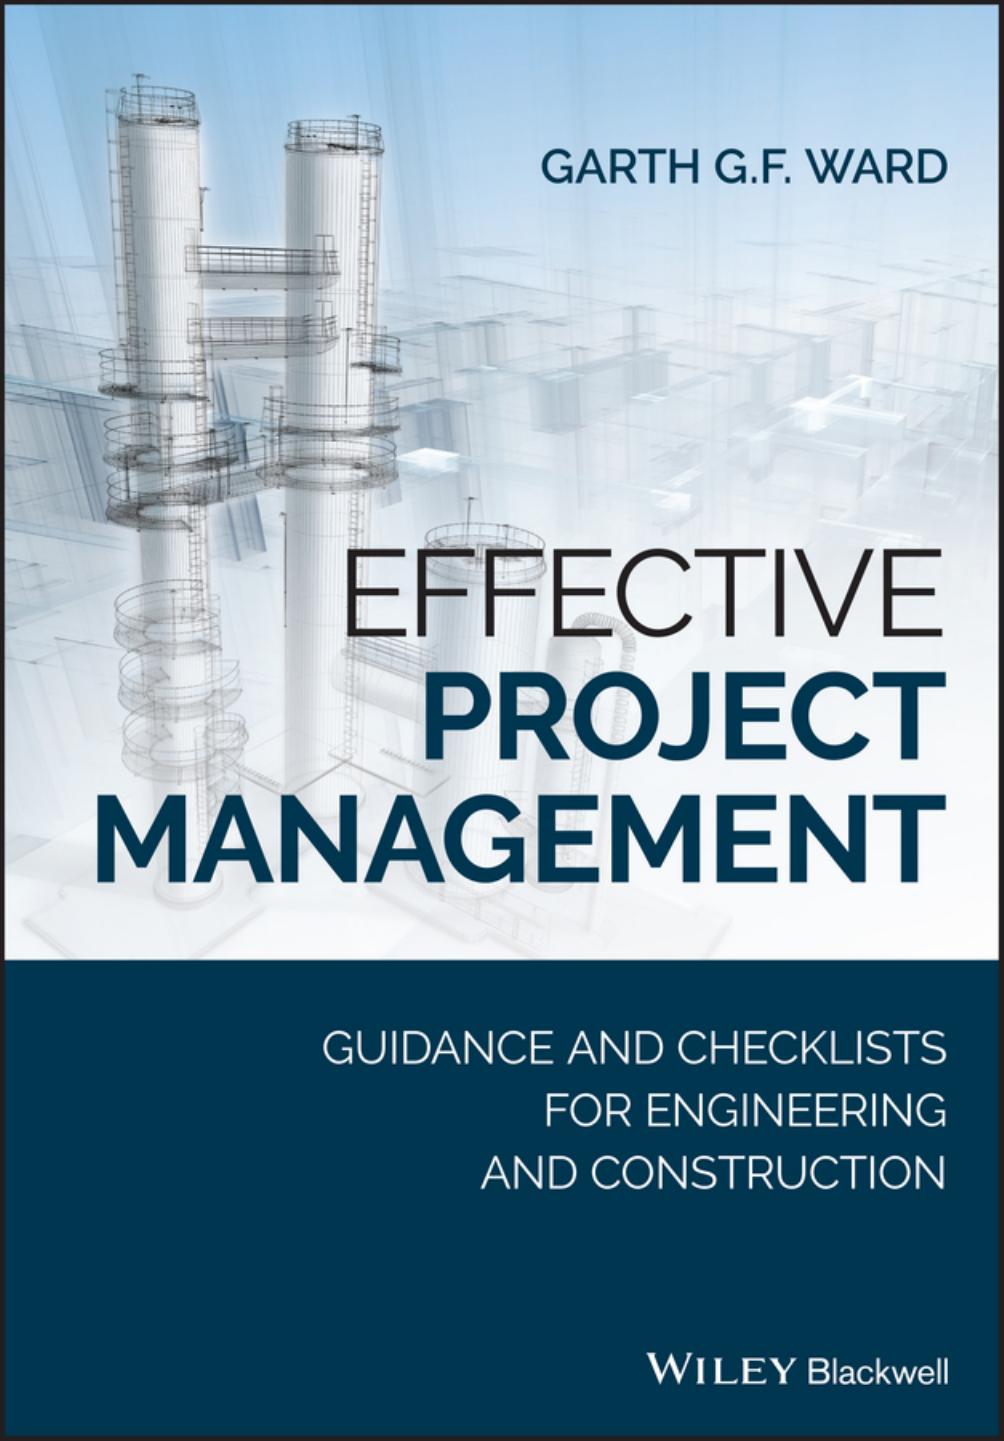 Effective Project Management: Guidance and Checklists for Engineering and Construction